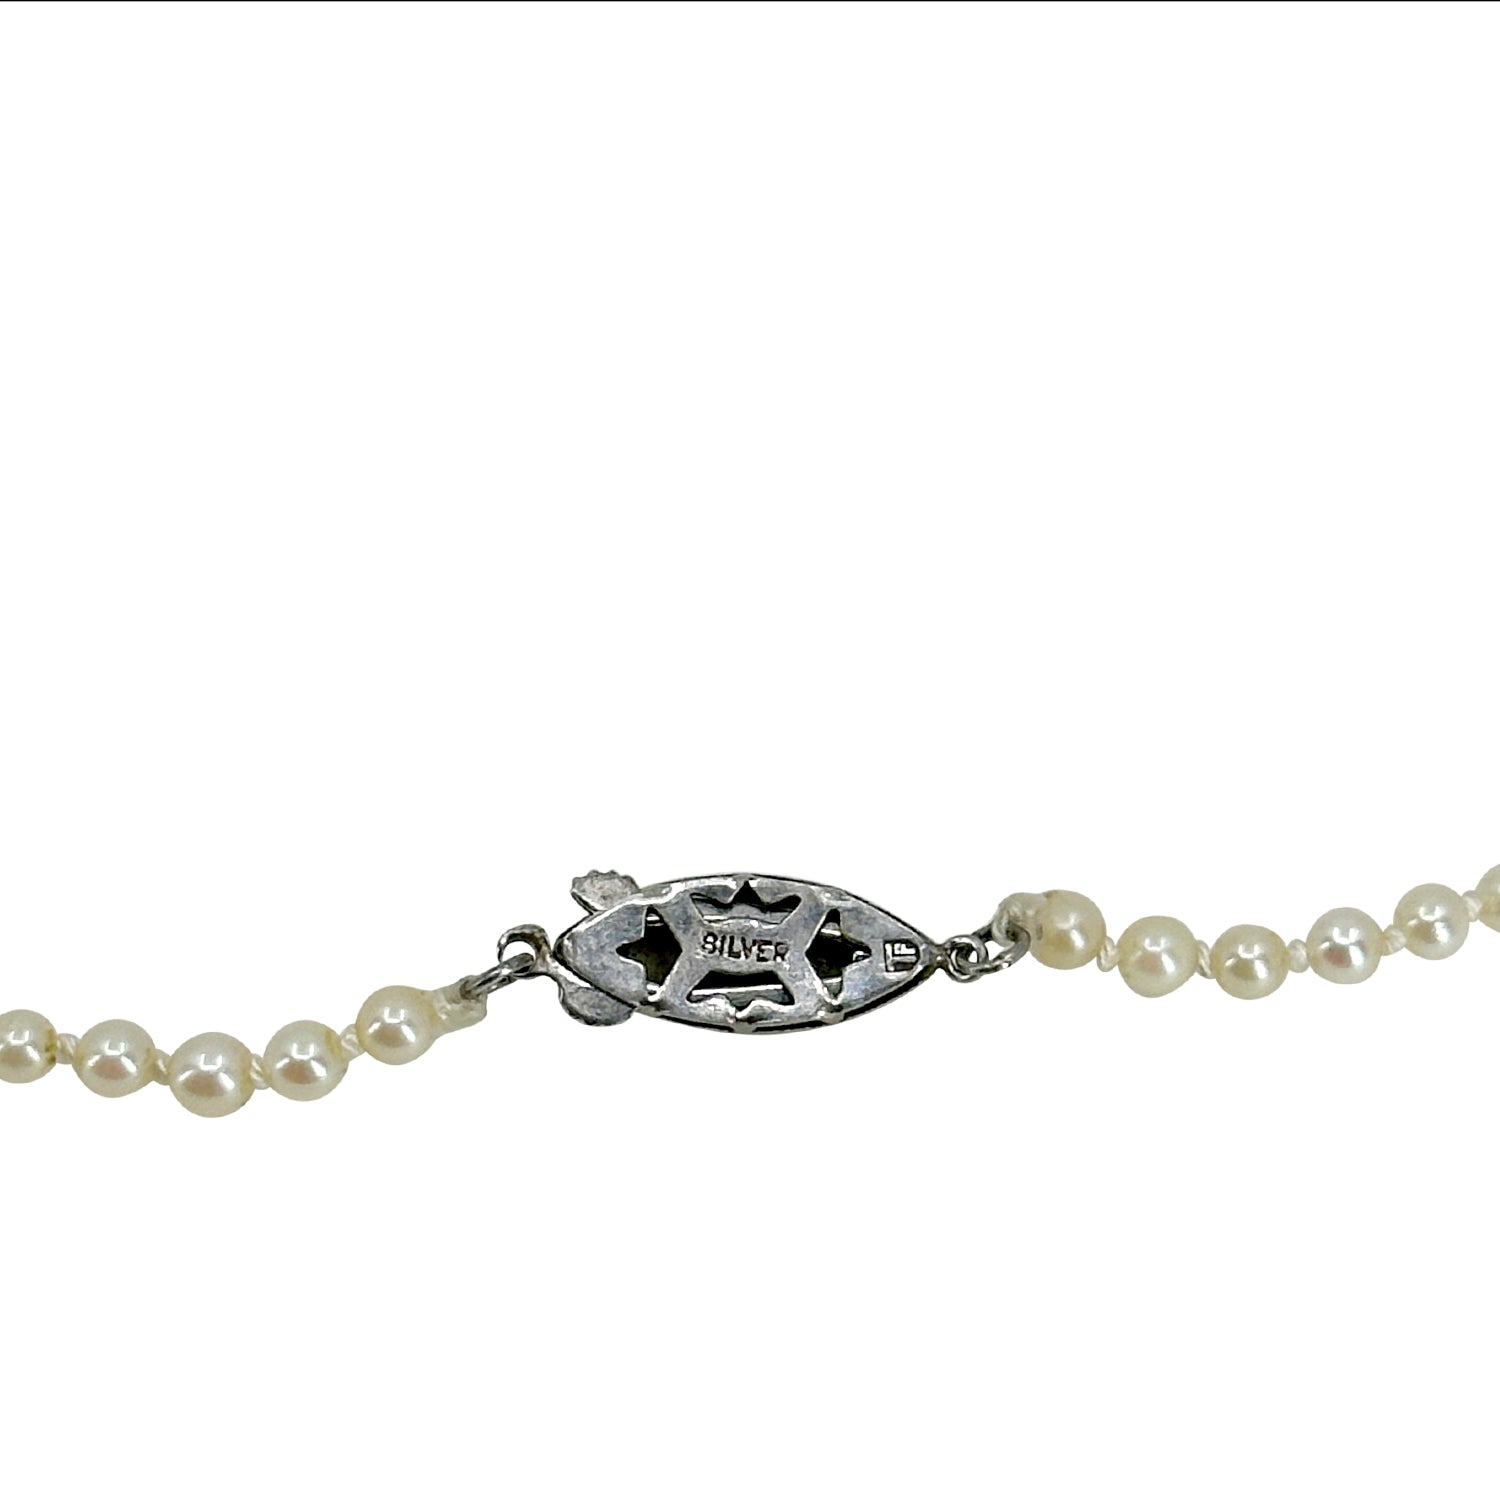 Tiny Petite Vintage Japanese Saltwater Cultured Akoya Seed Pearl Necklace - Sterling Silver 18.75 Inch